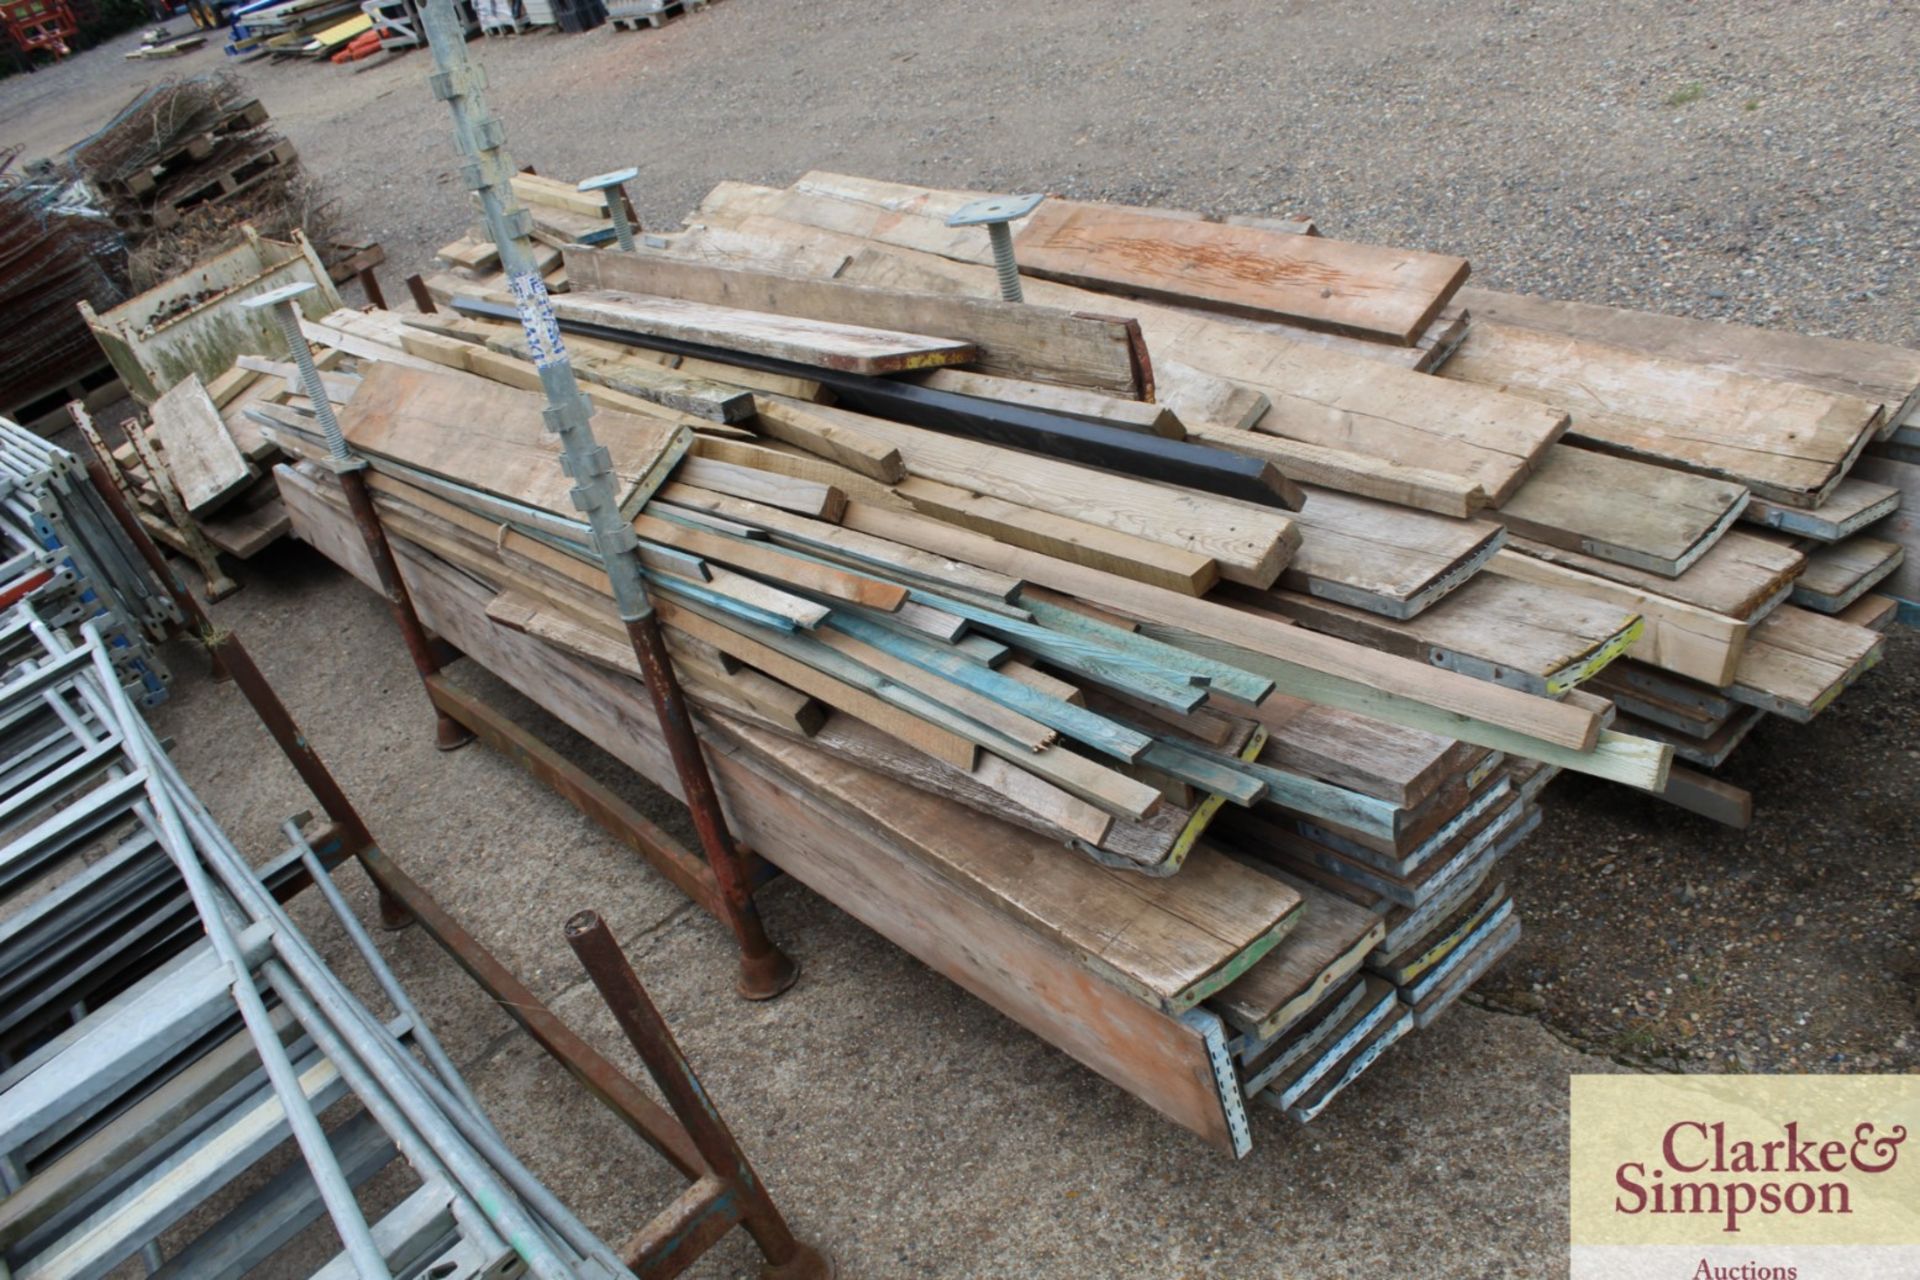 Stillage of scaffold boards and other timber. - Image 4 of 6